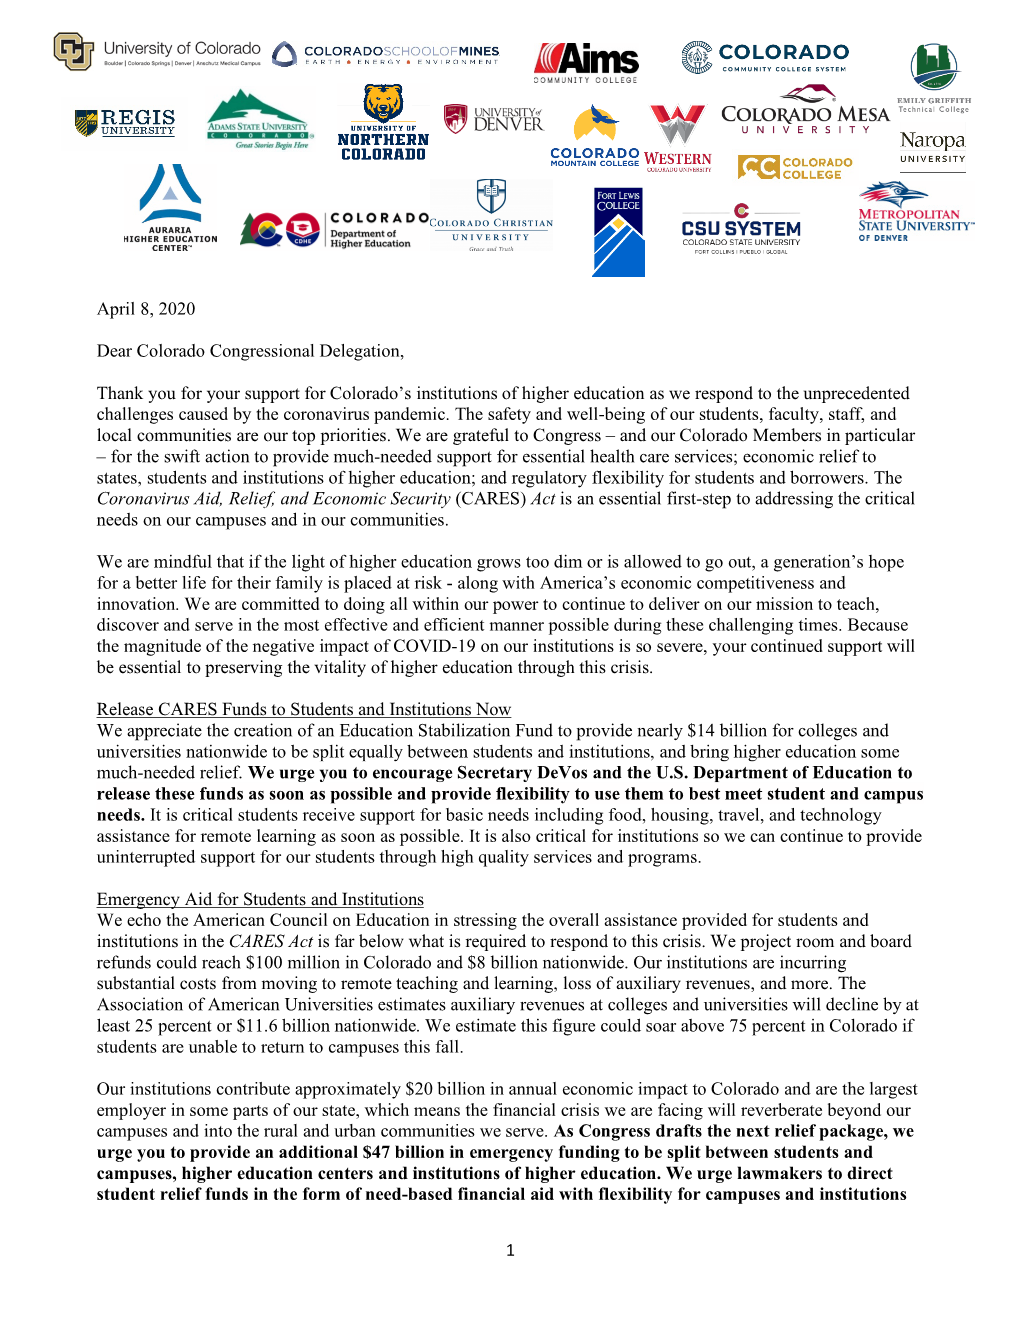 1 April 8, 2020 Dear Colorado Congressional Delegation, Thank You for Your Support for Colorado's Institutions of Higher Educa